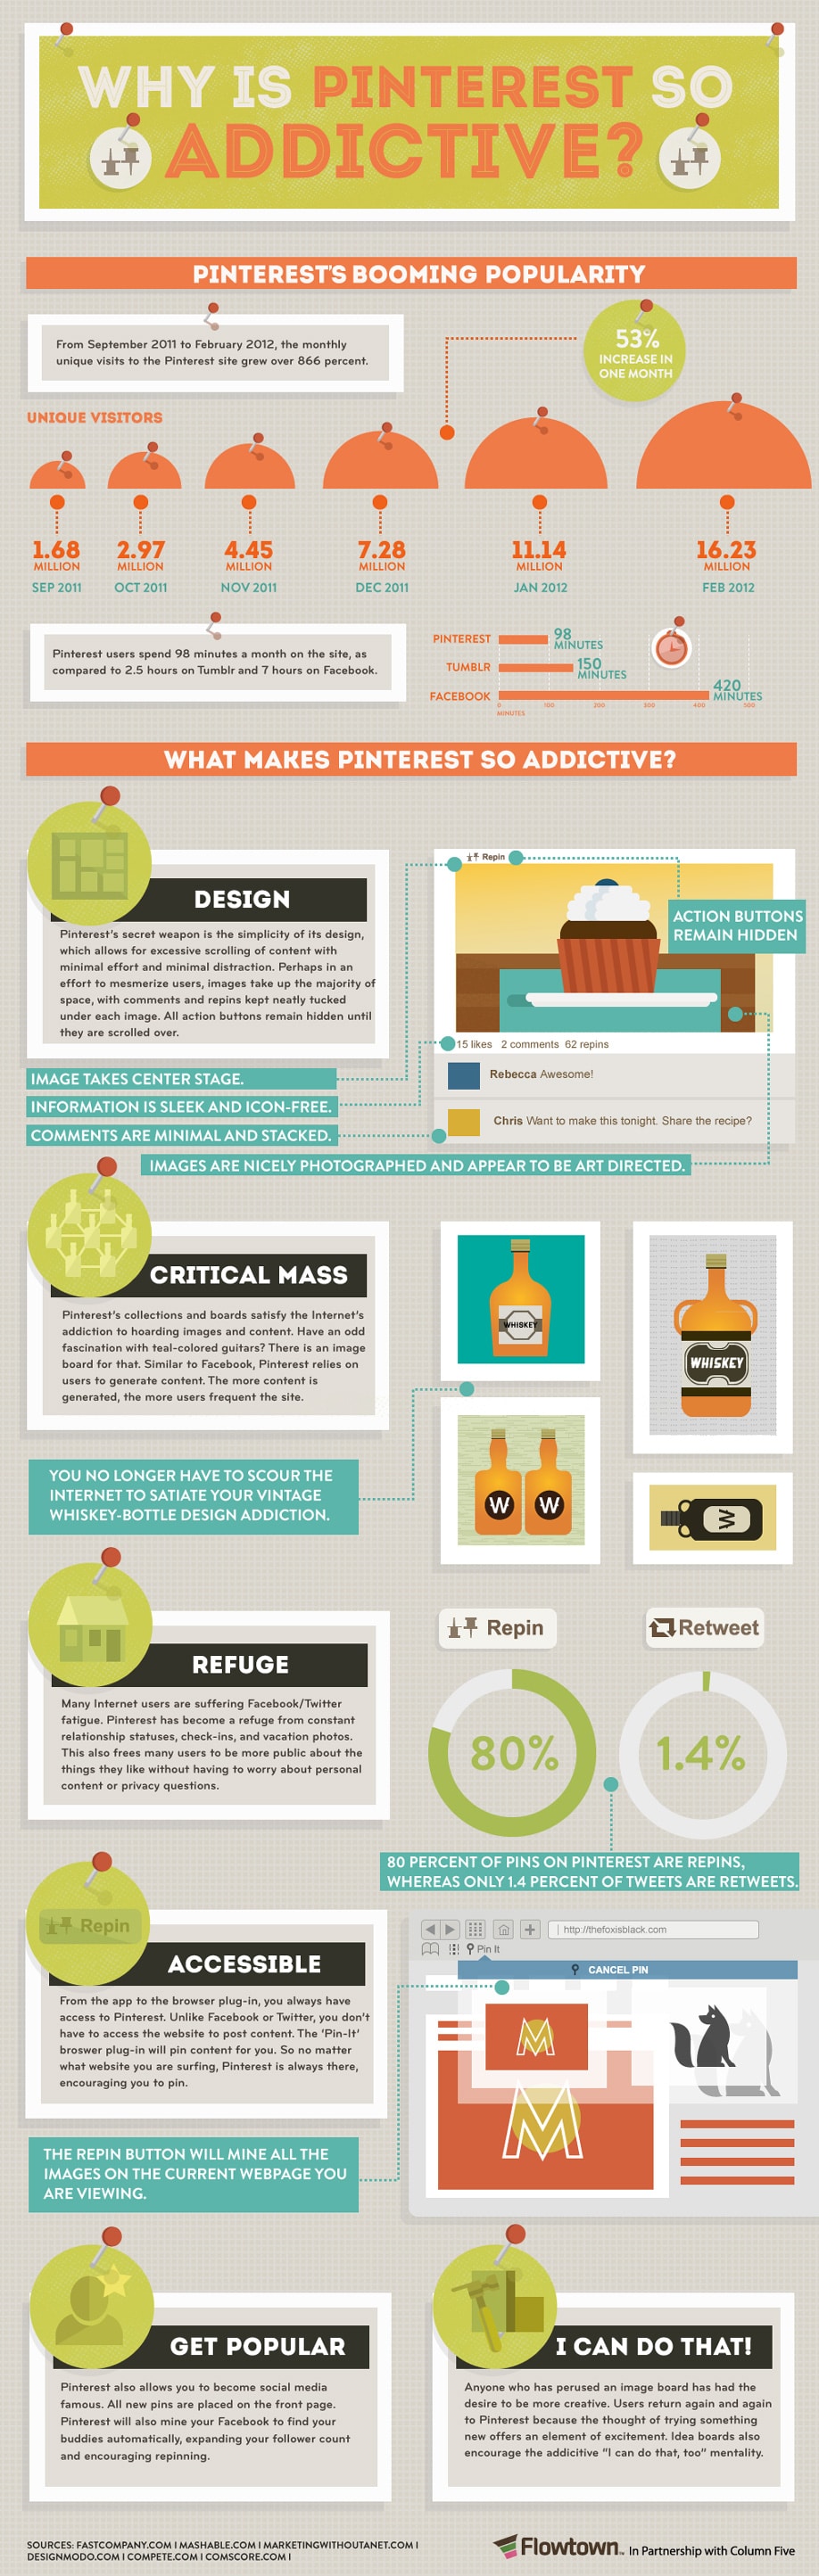 why-is-pinterest-addictive-infographic